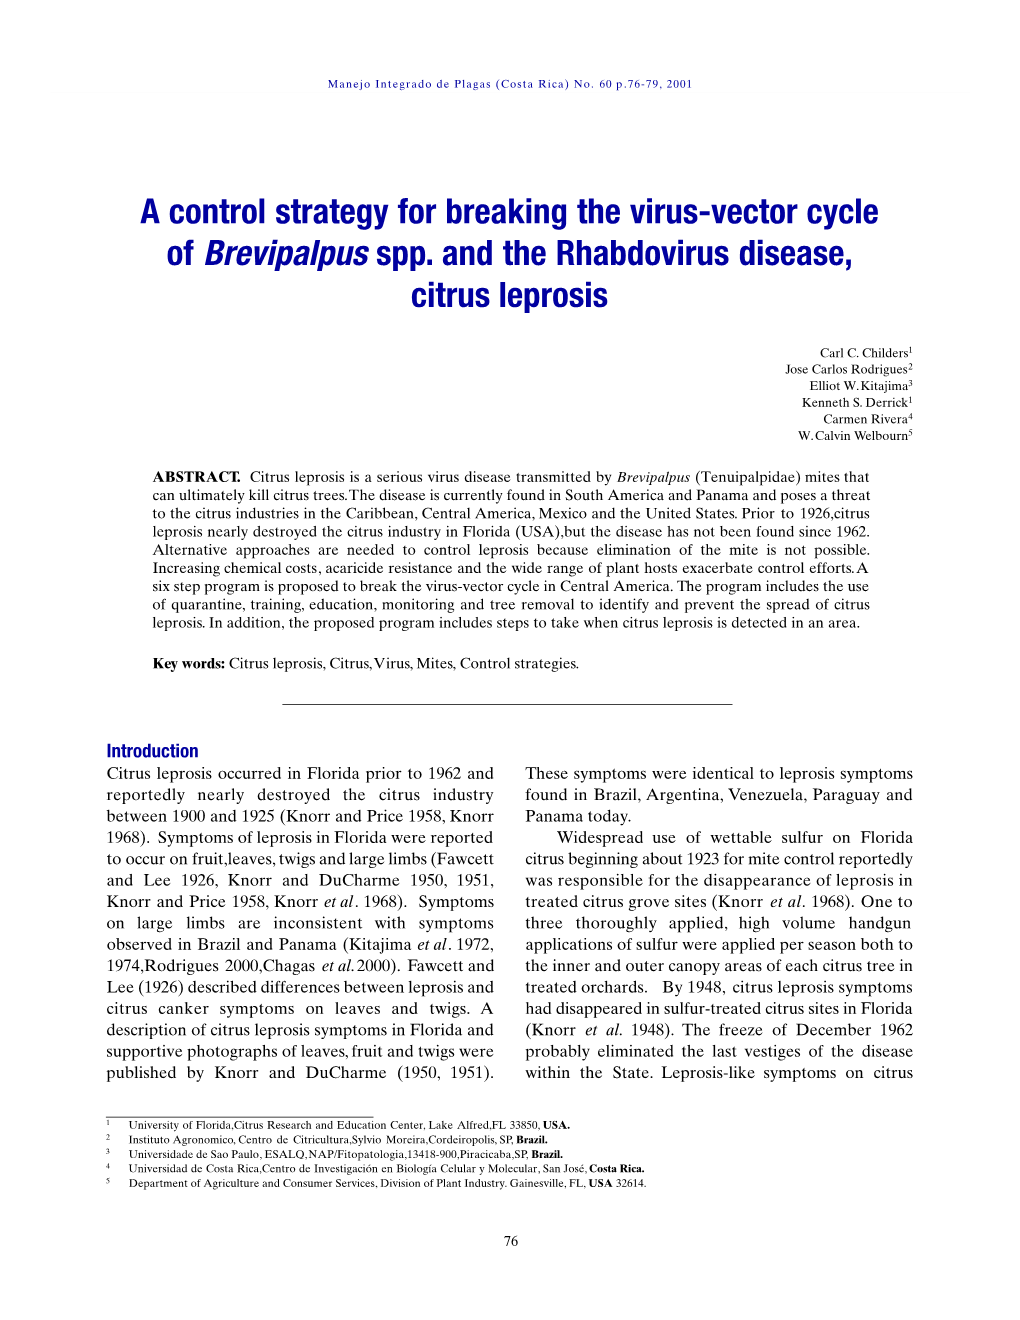 A Control Strategy for Breaking the Virus-Vector Cycle of Brevipalpus Spp. and the Rhabdovirus Disease, Citrus Leprosis